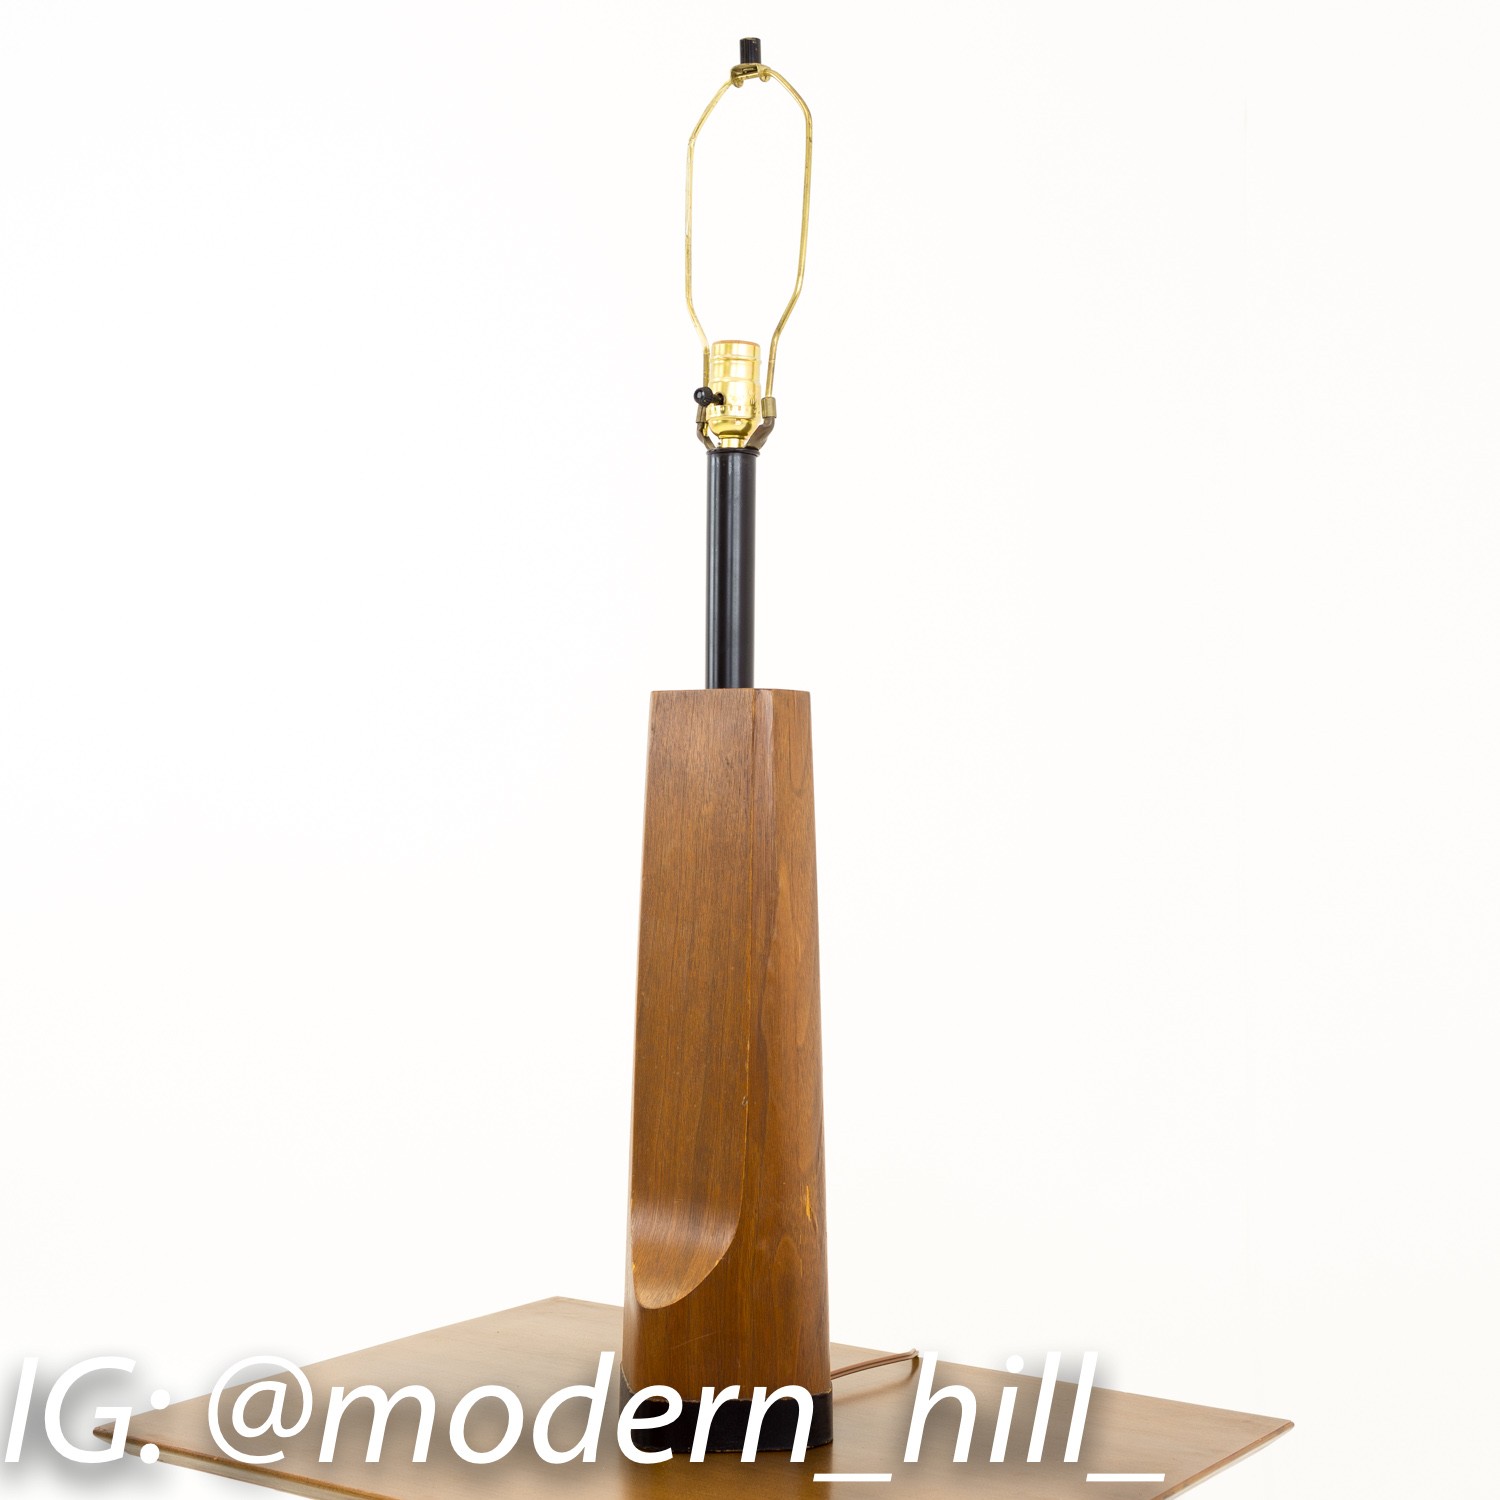 Harold Weiss and Richard Barr for Laurel Mid Century Modern Wood Table Lamps - Pair